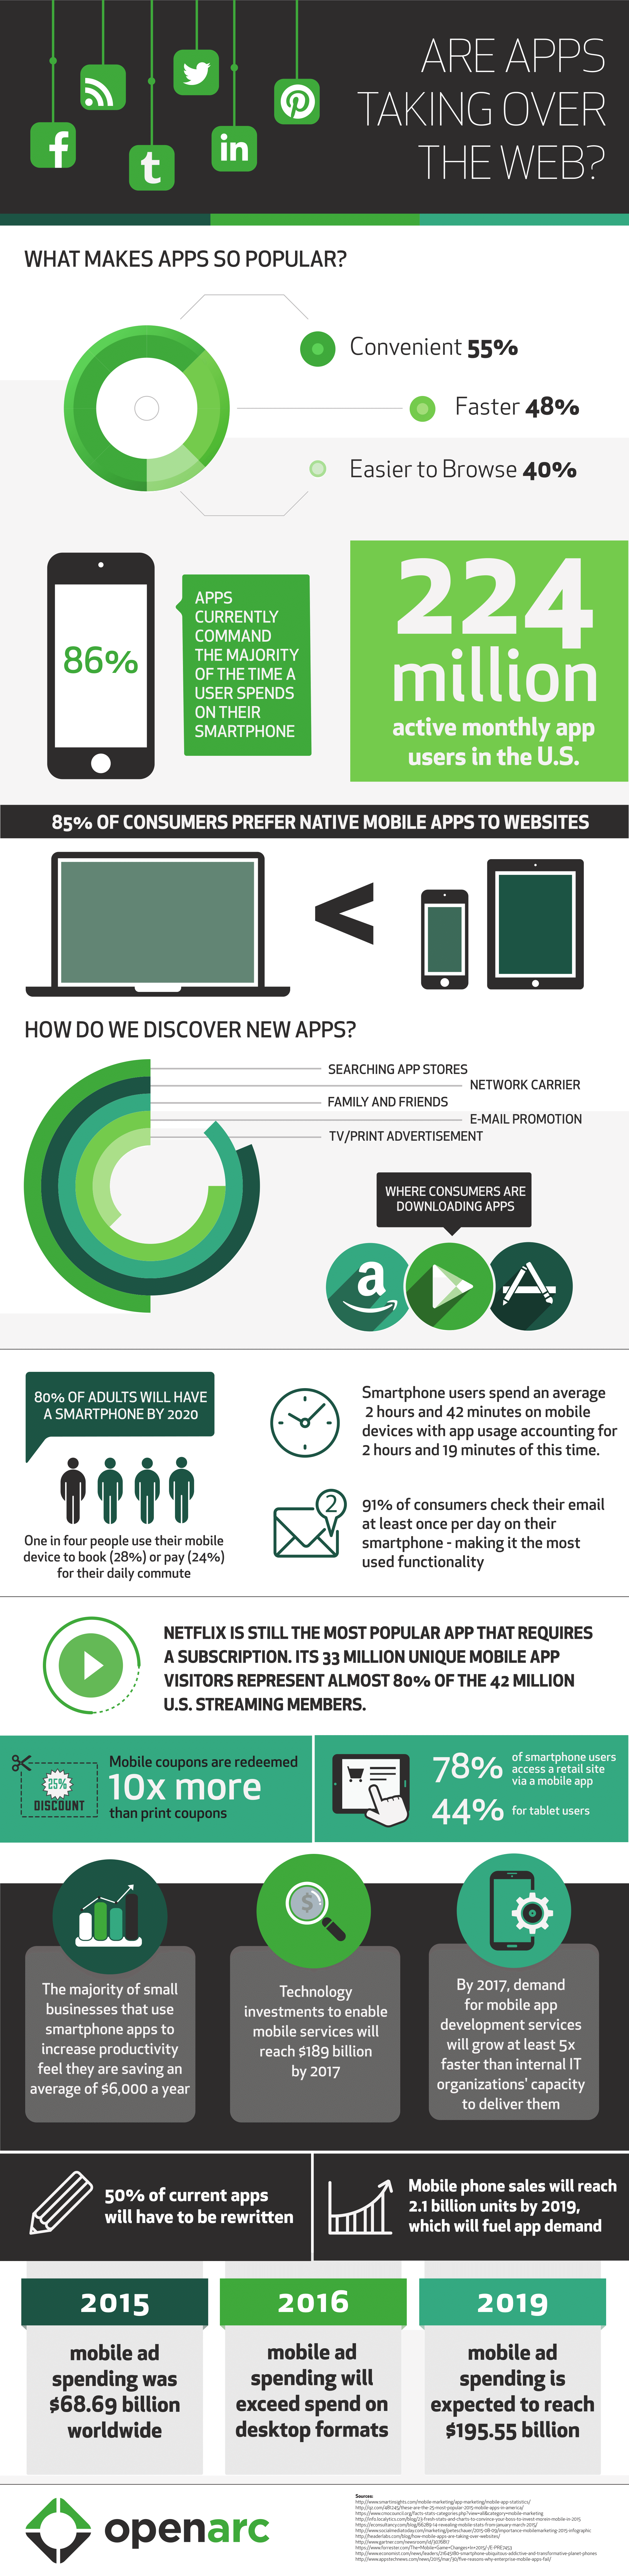 Openarc Apps Infographic FINAL 2